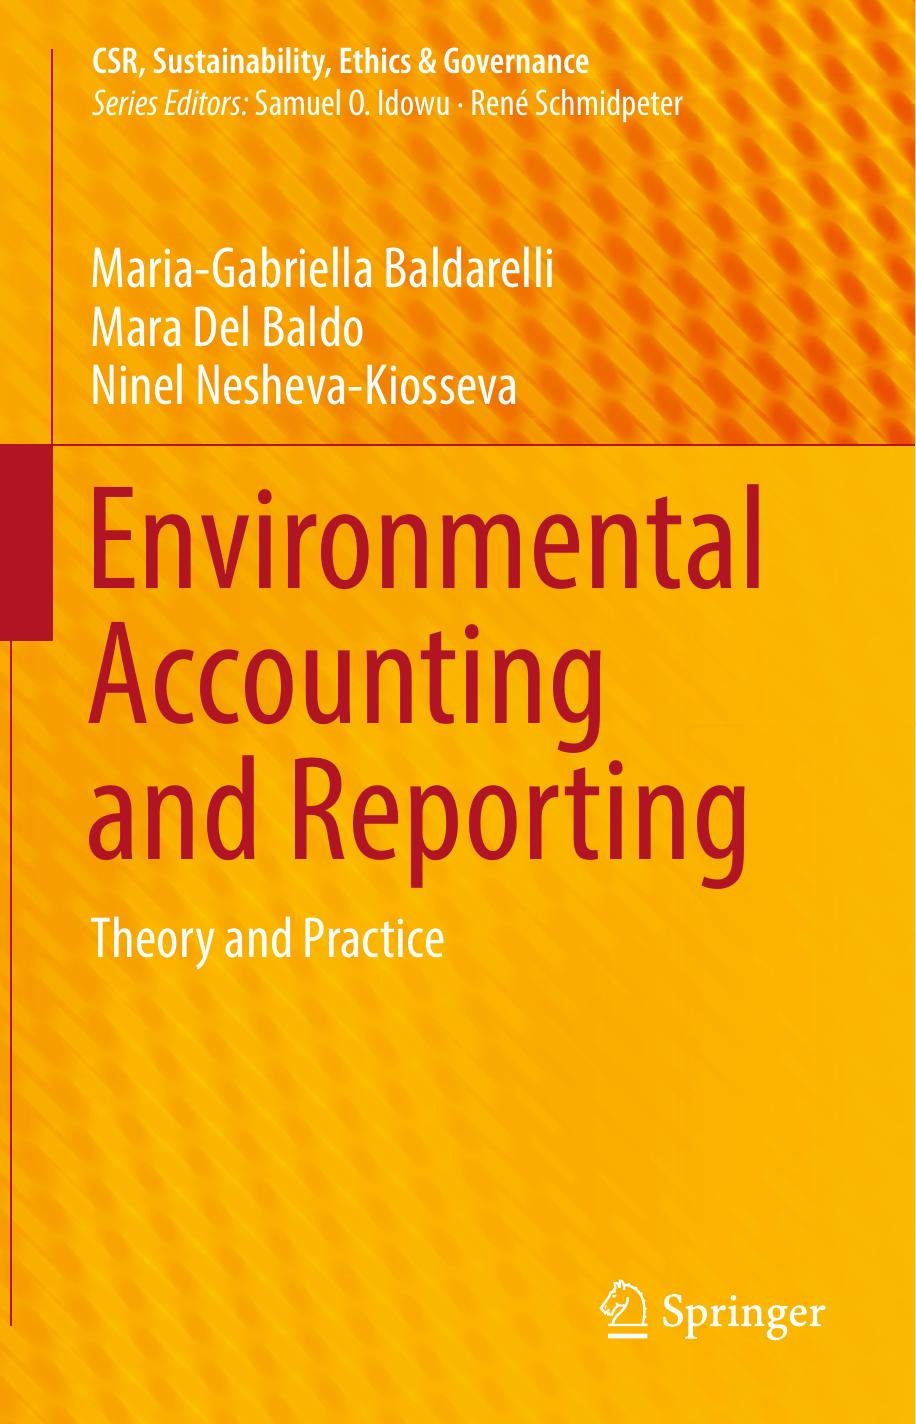 Environmental Accounting and Reporting  Theory and Practice ( PDFDrive ) 2017